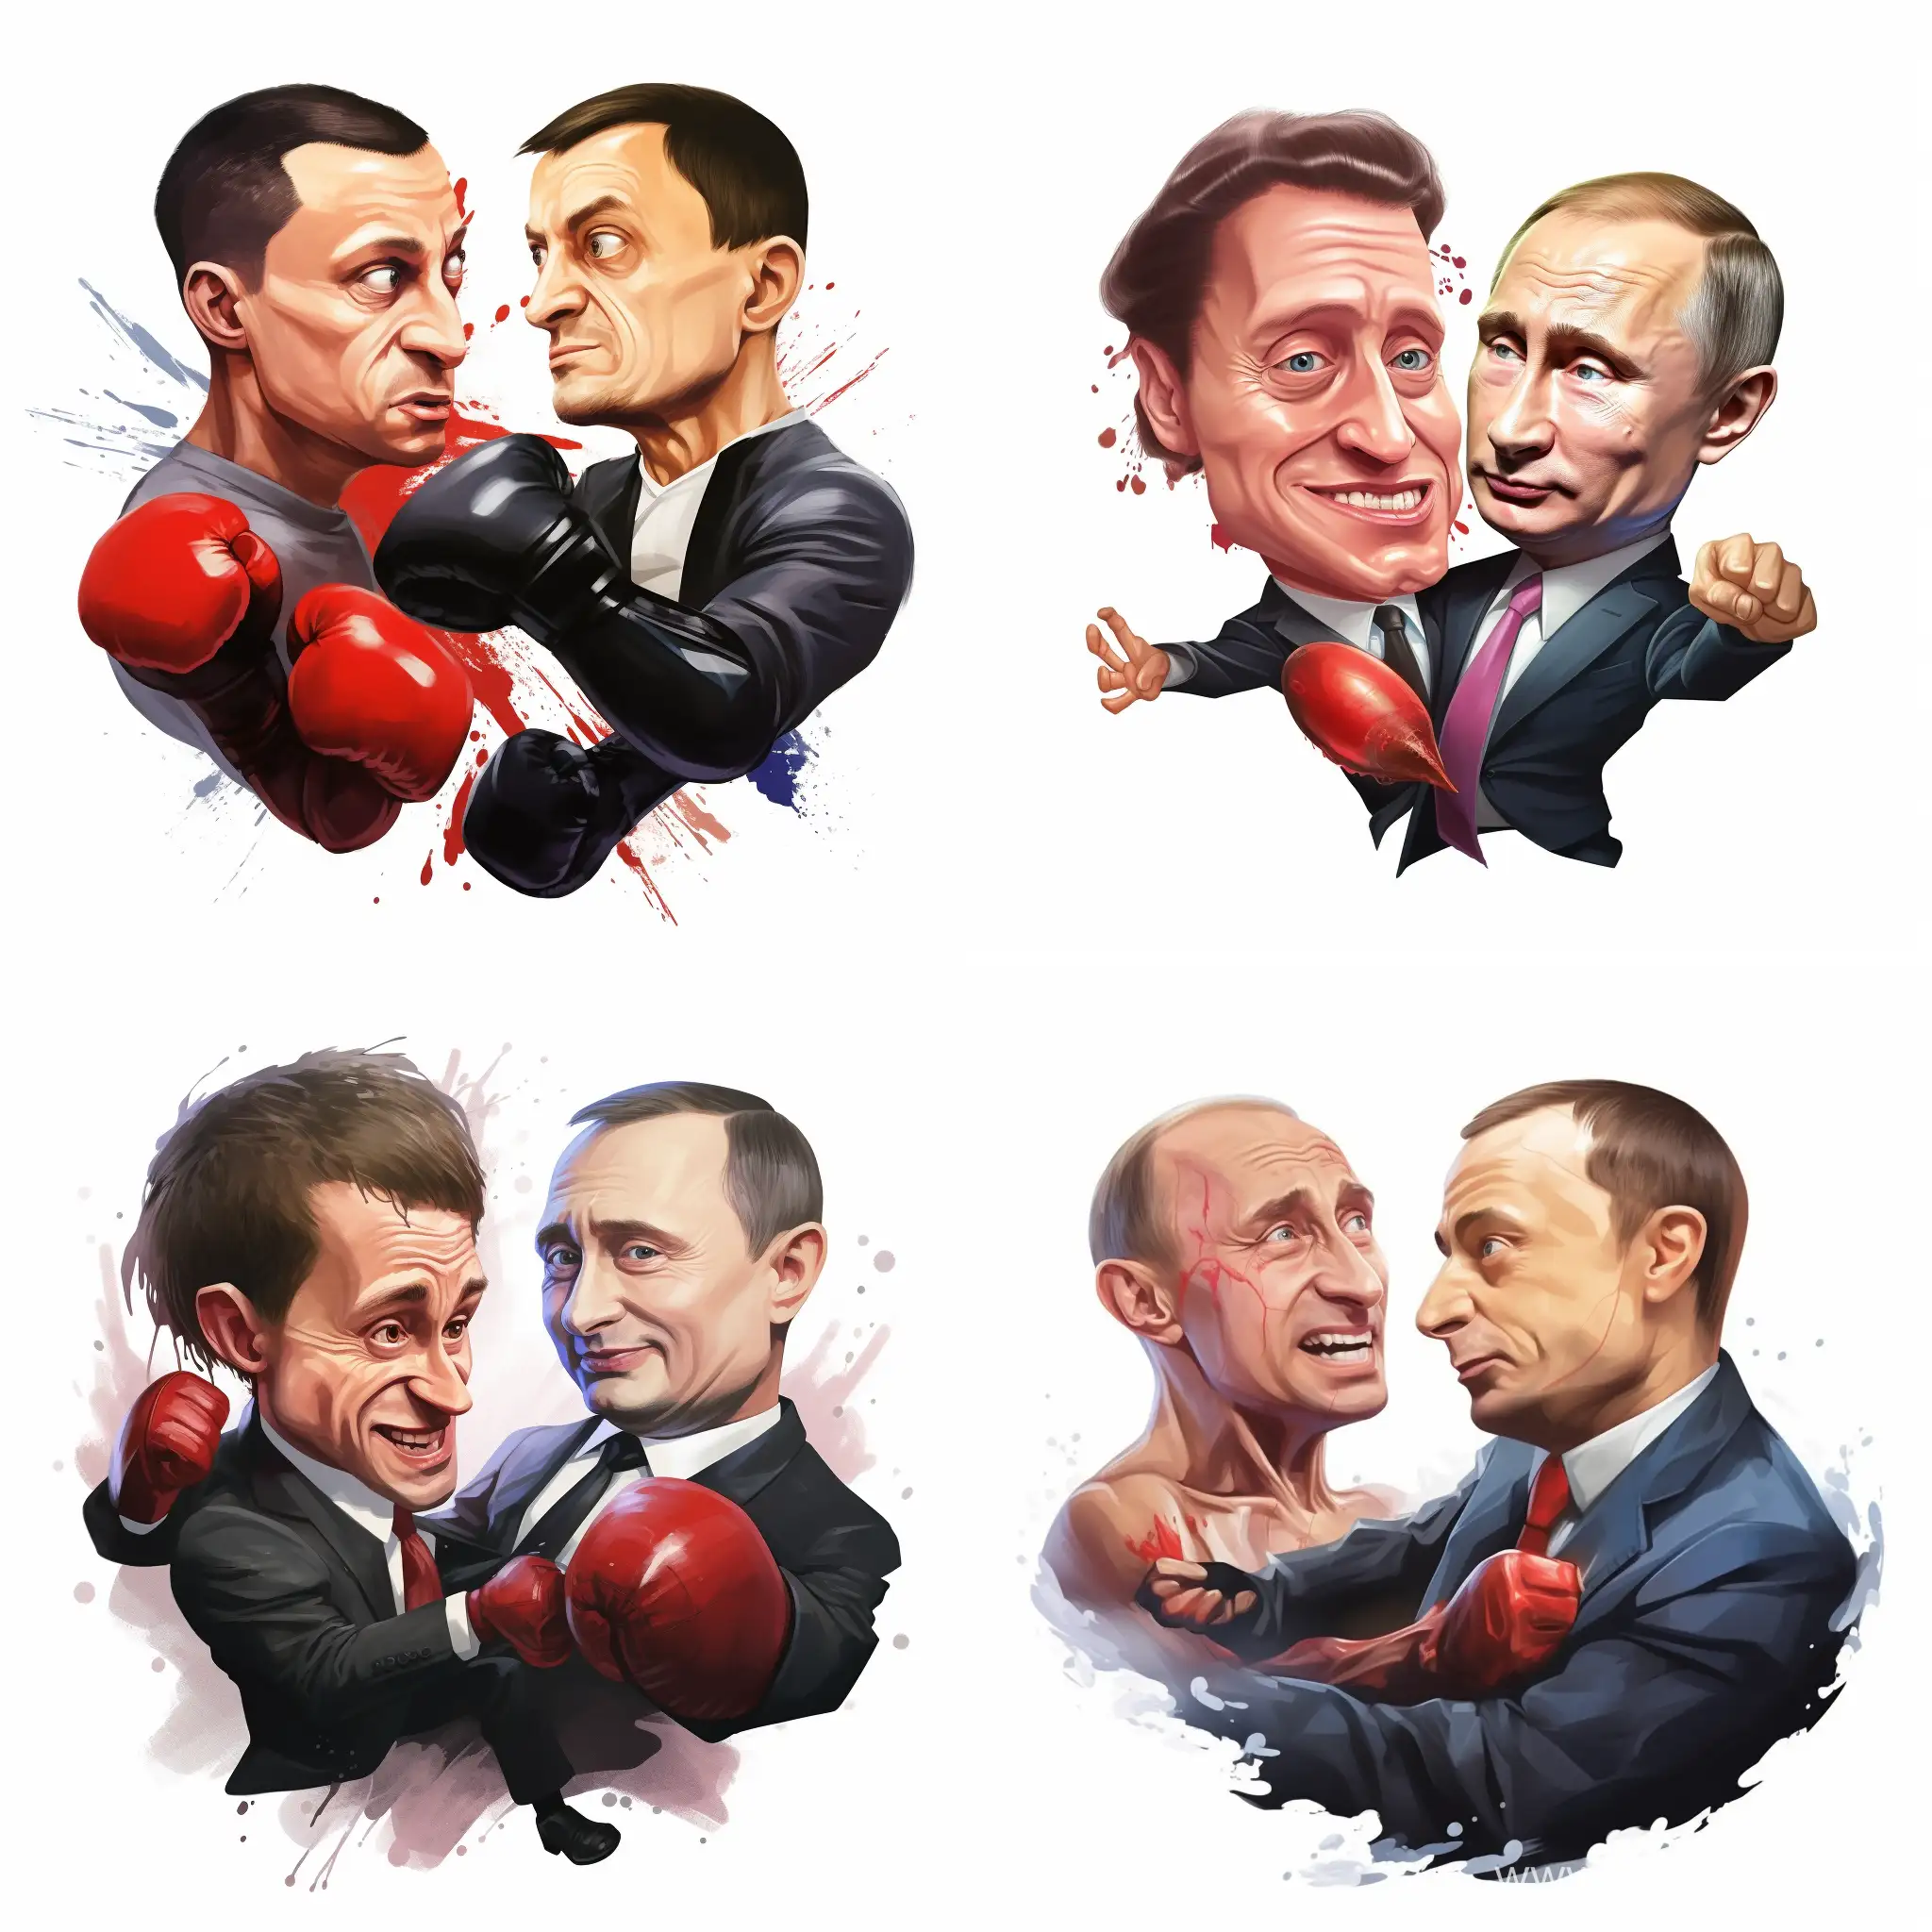 Political-Satire-Putin-Punches-Zelensky-in-Caricature-Style